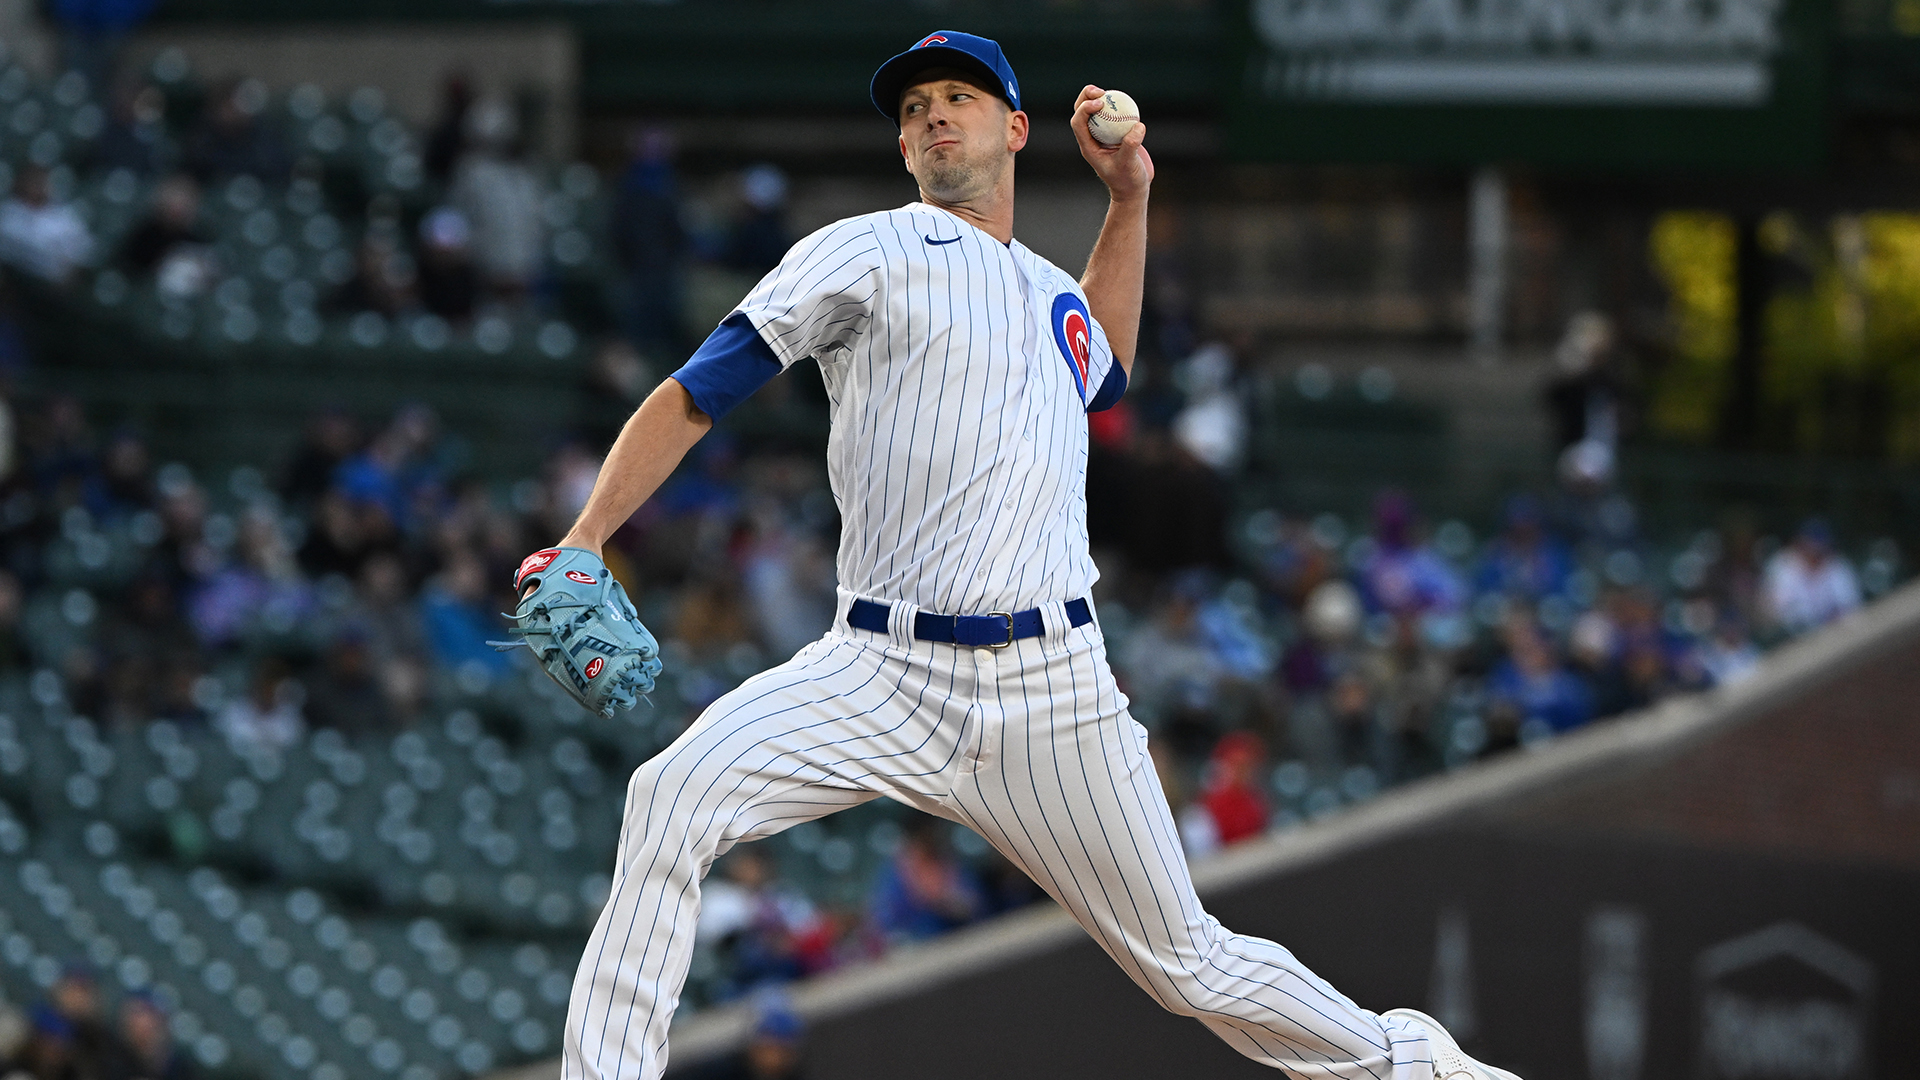 Braves 6, Cubs 5: Jameson Taillon has an outstanding outing, but